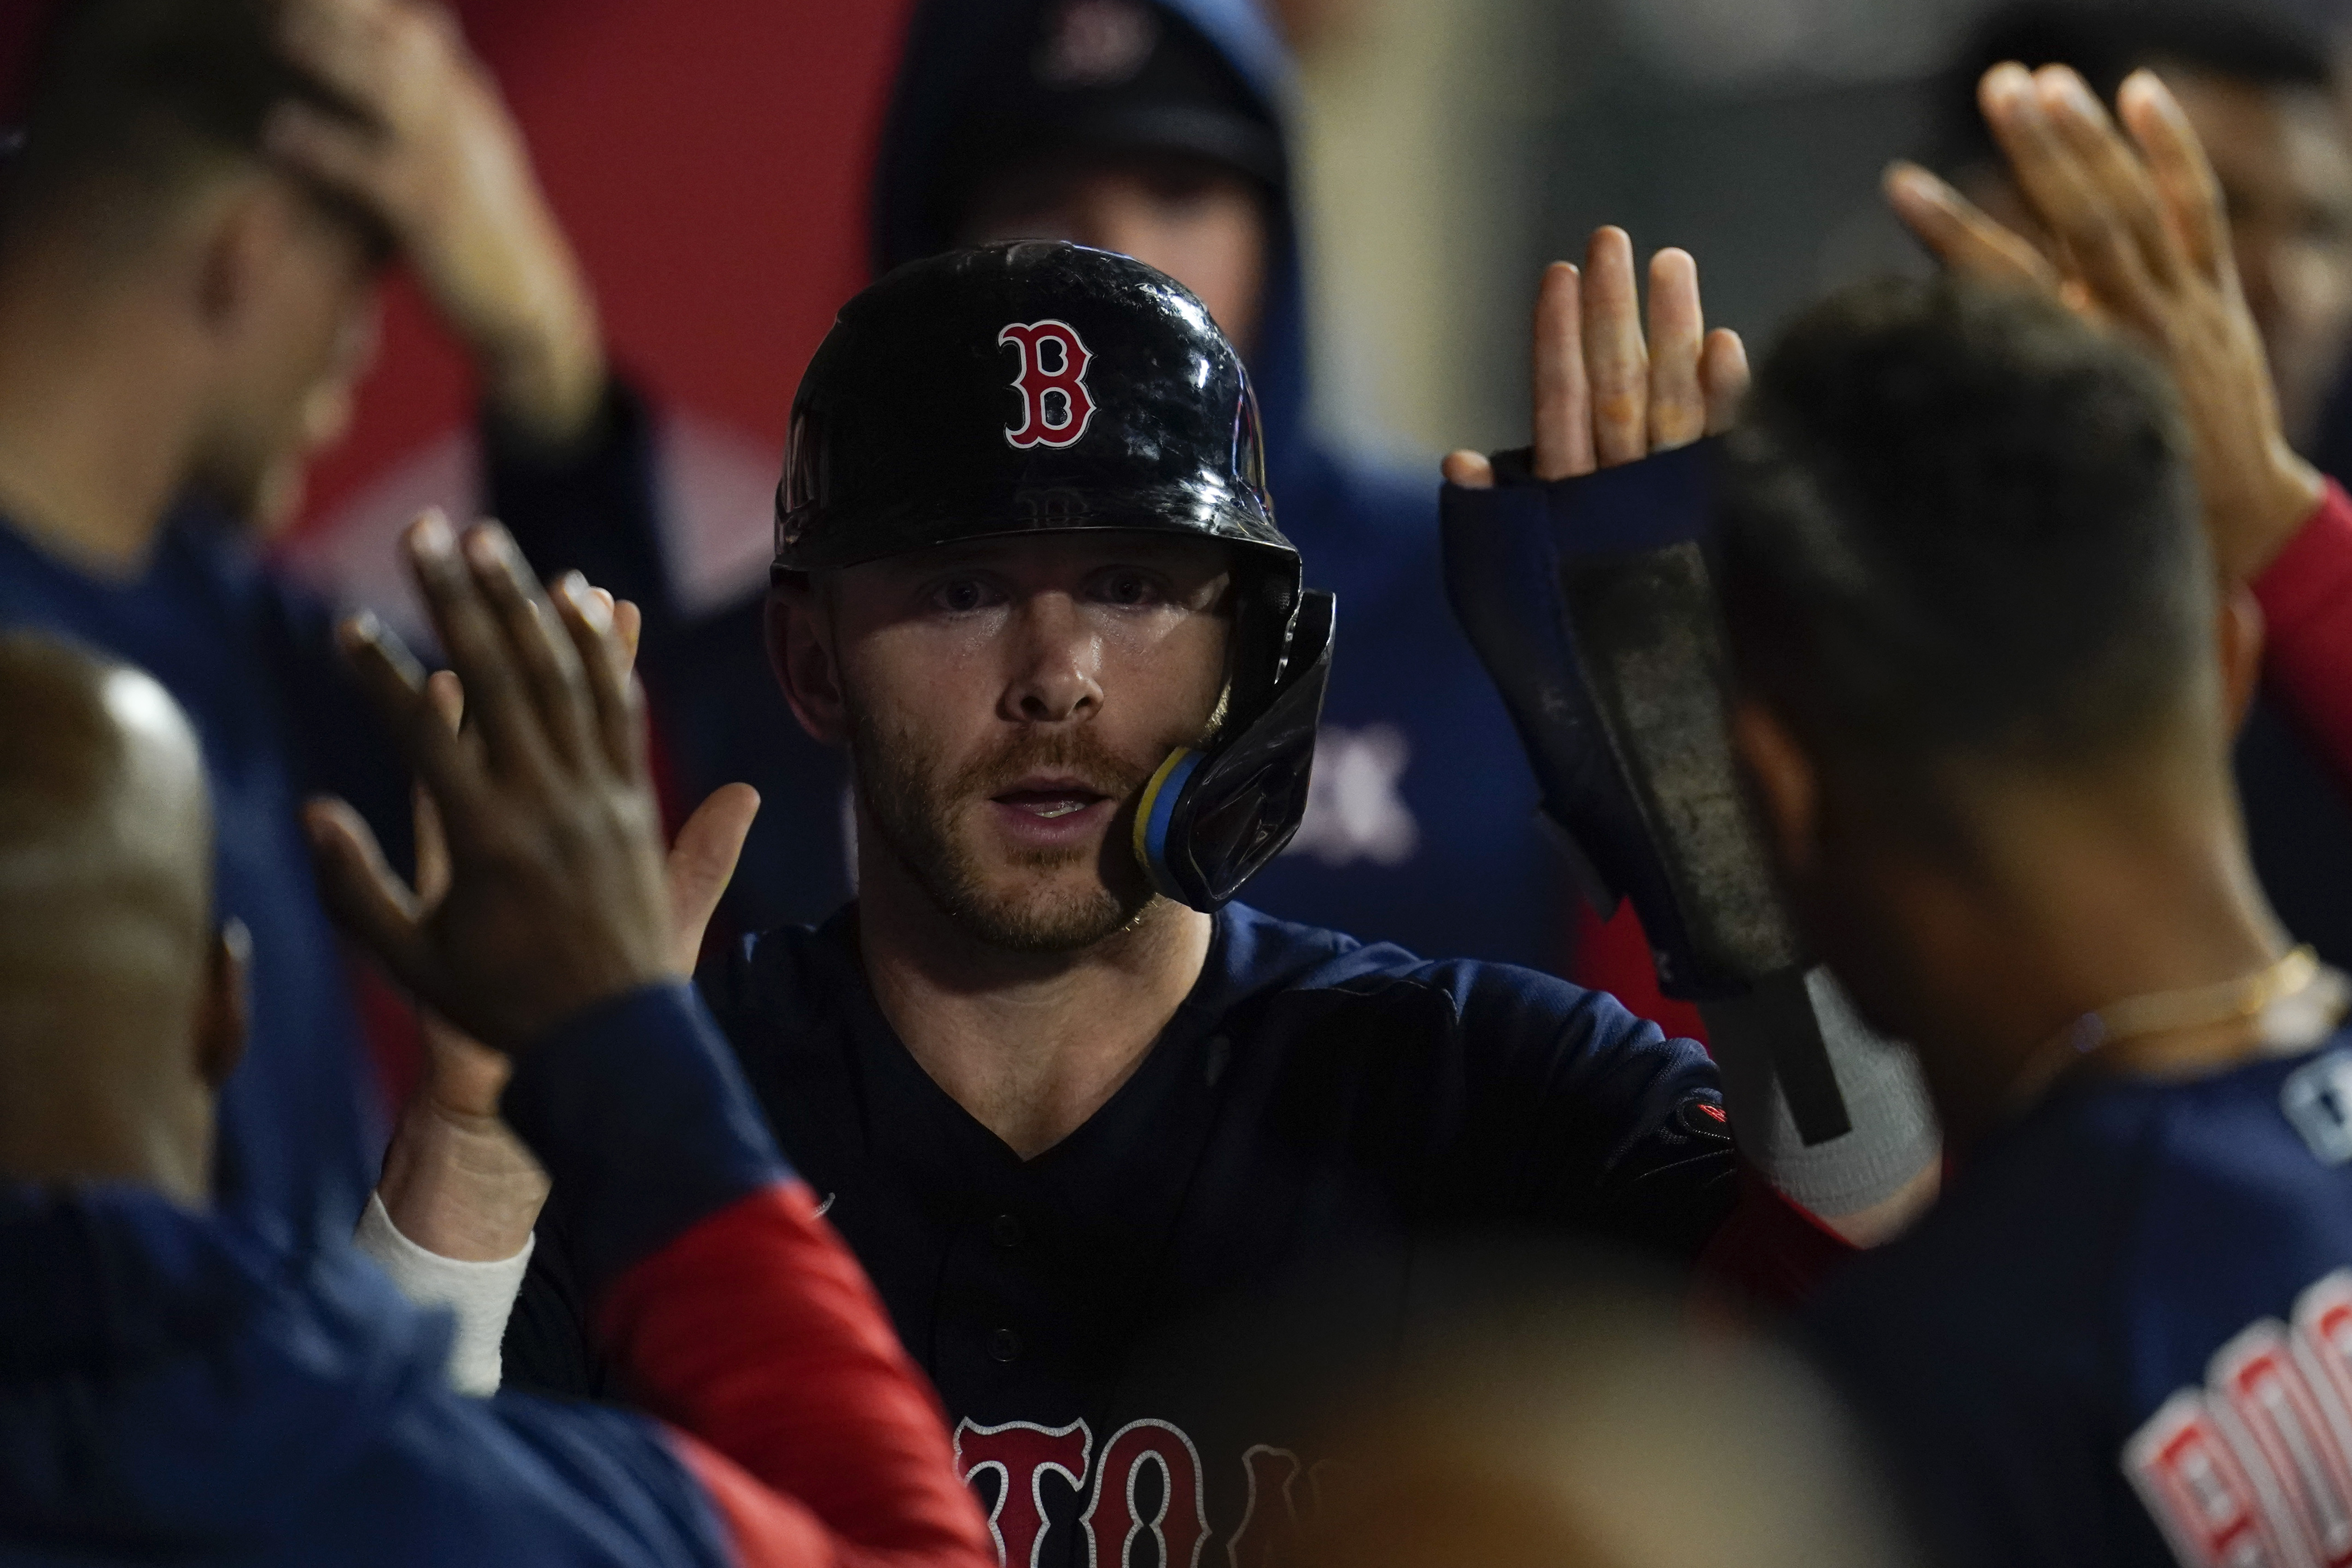 Story's 3-run homer out of Fenway helps Red Sox beat Tigers